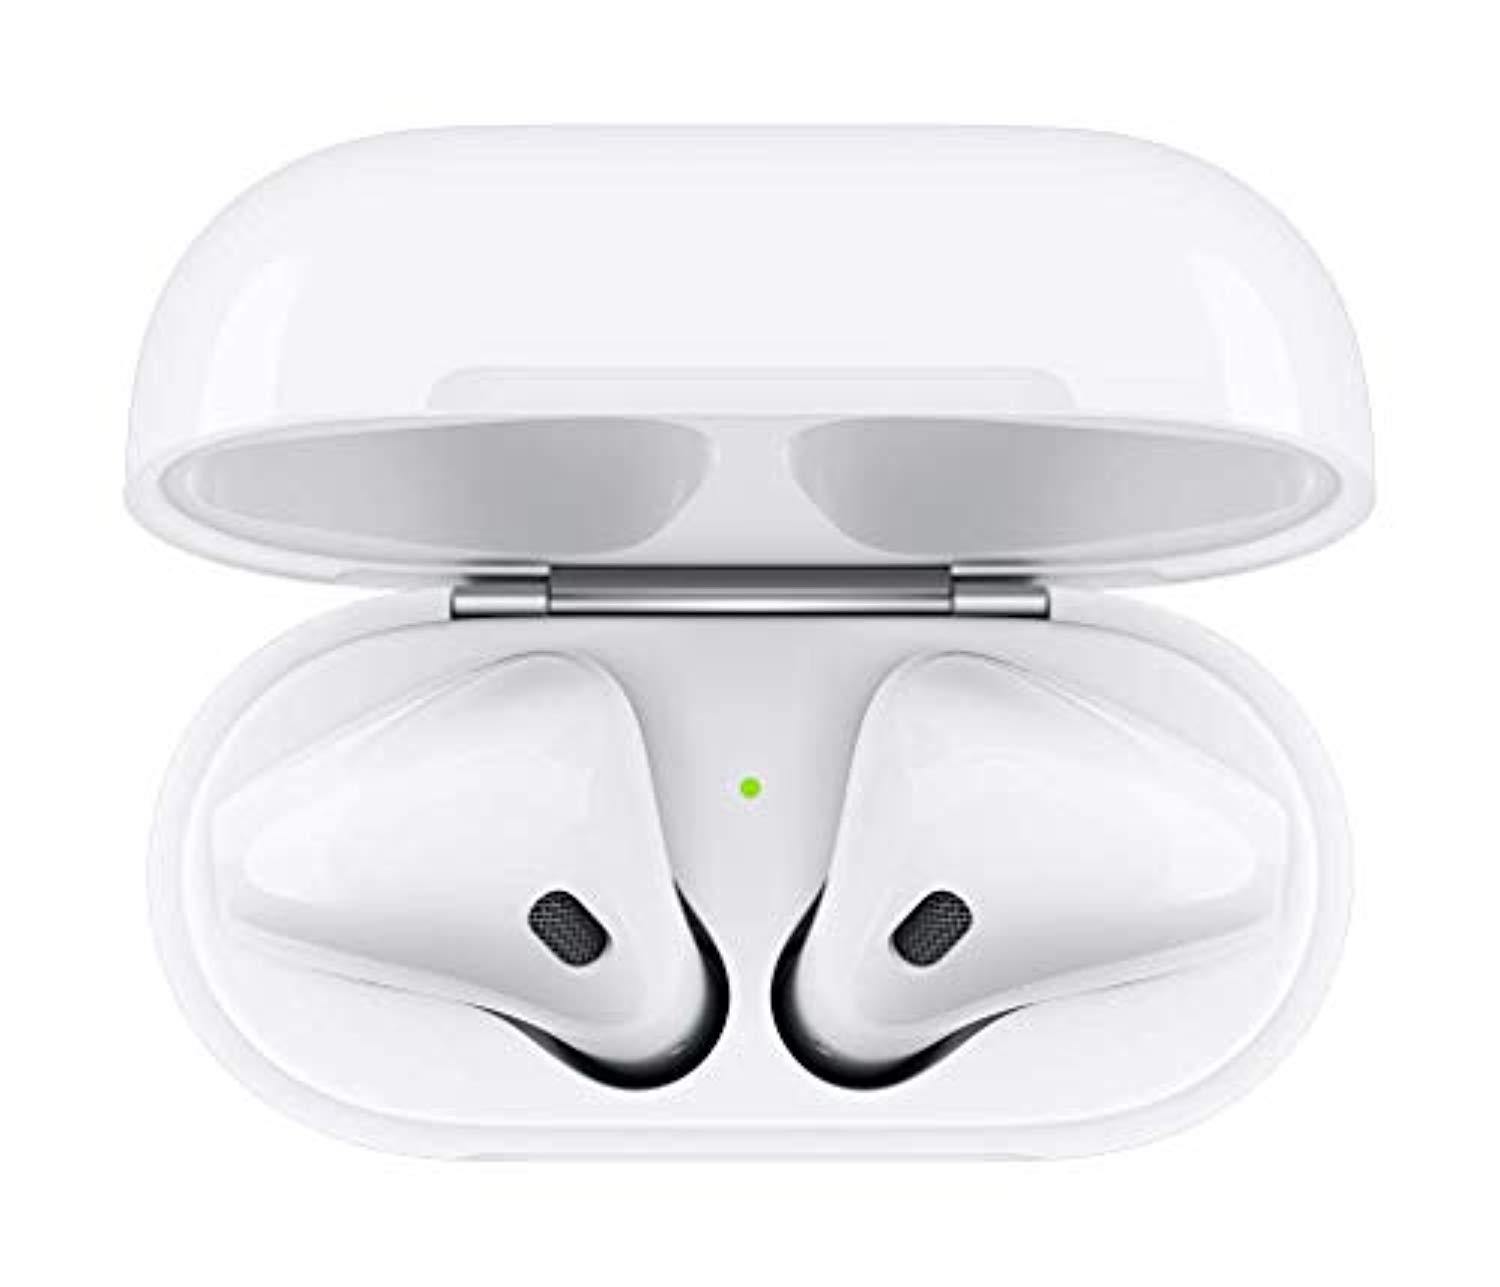 Apple Airpods with Charging Case - Offer Games